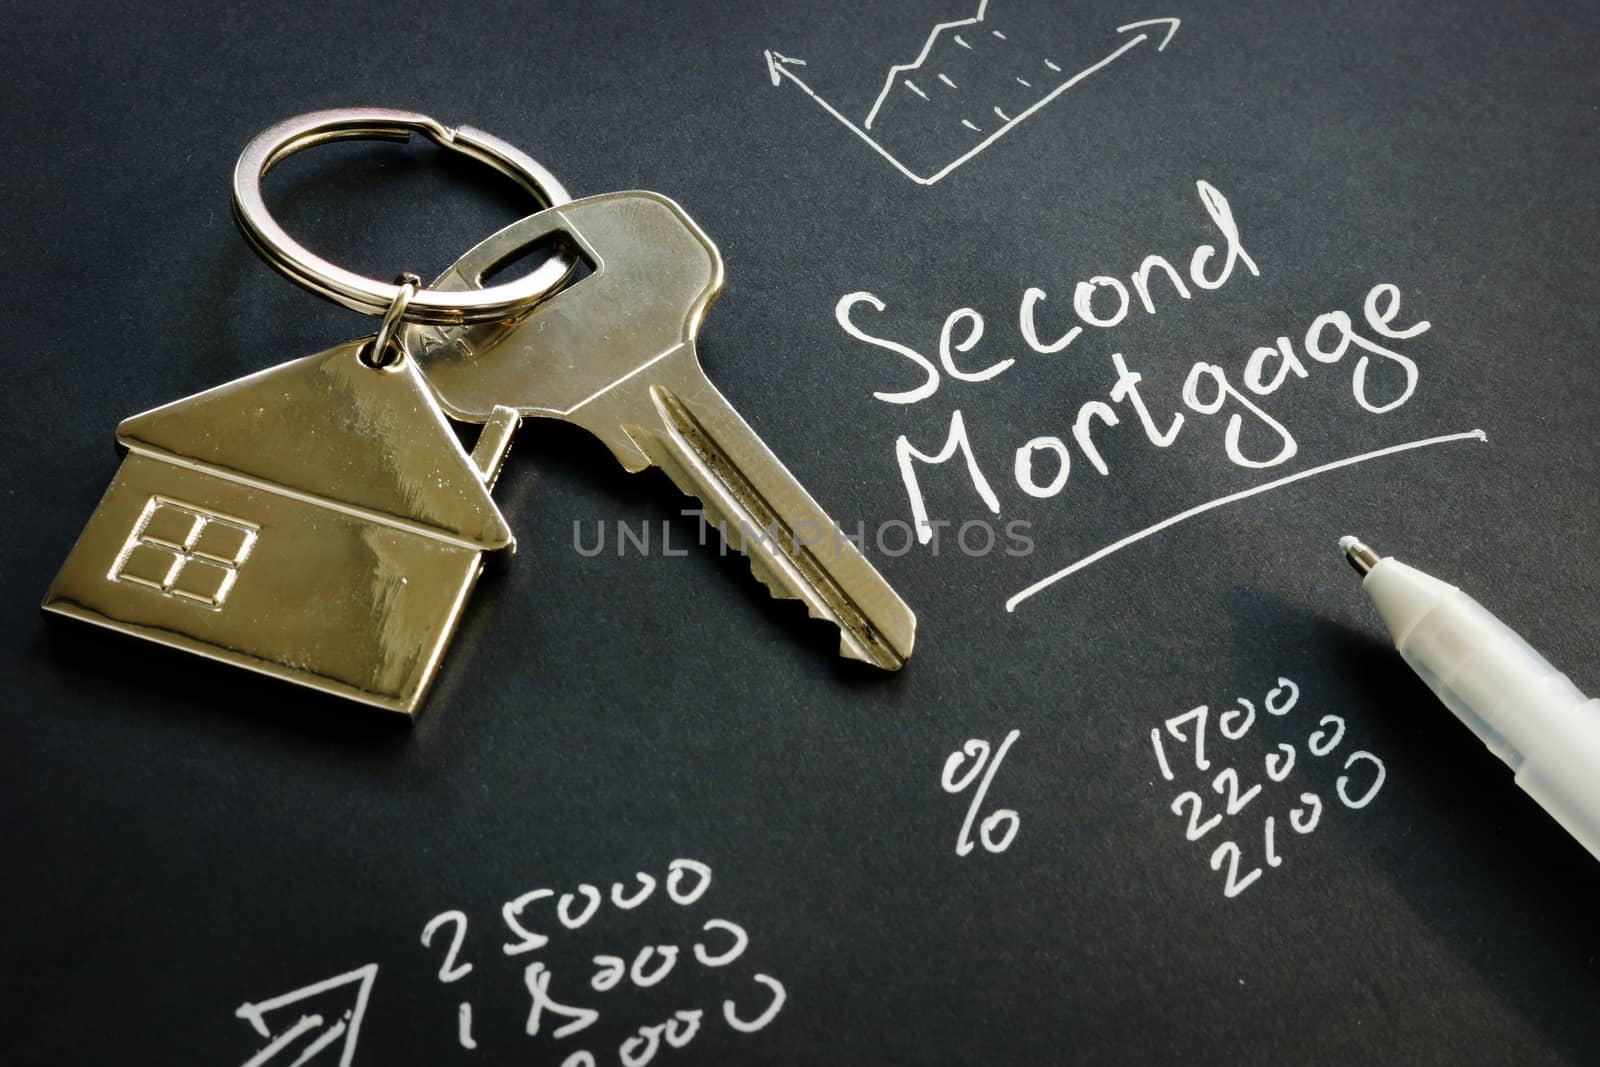 Second Mortgage sign and key from home.